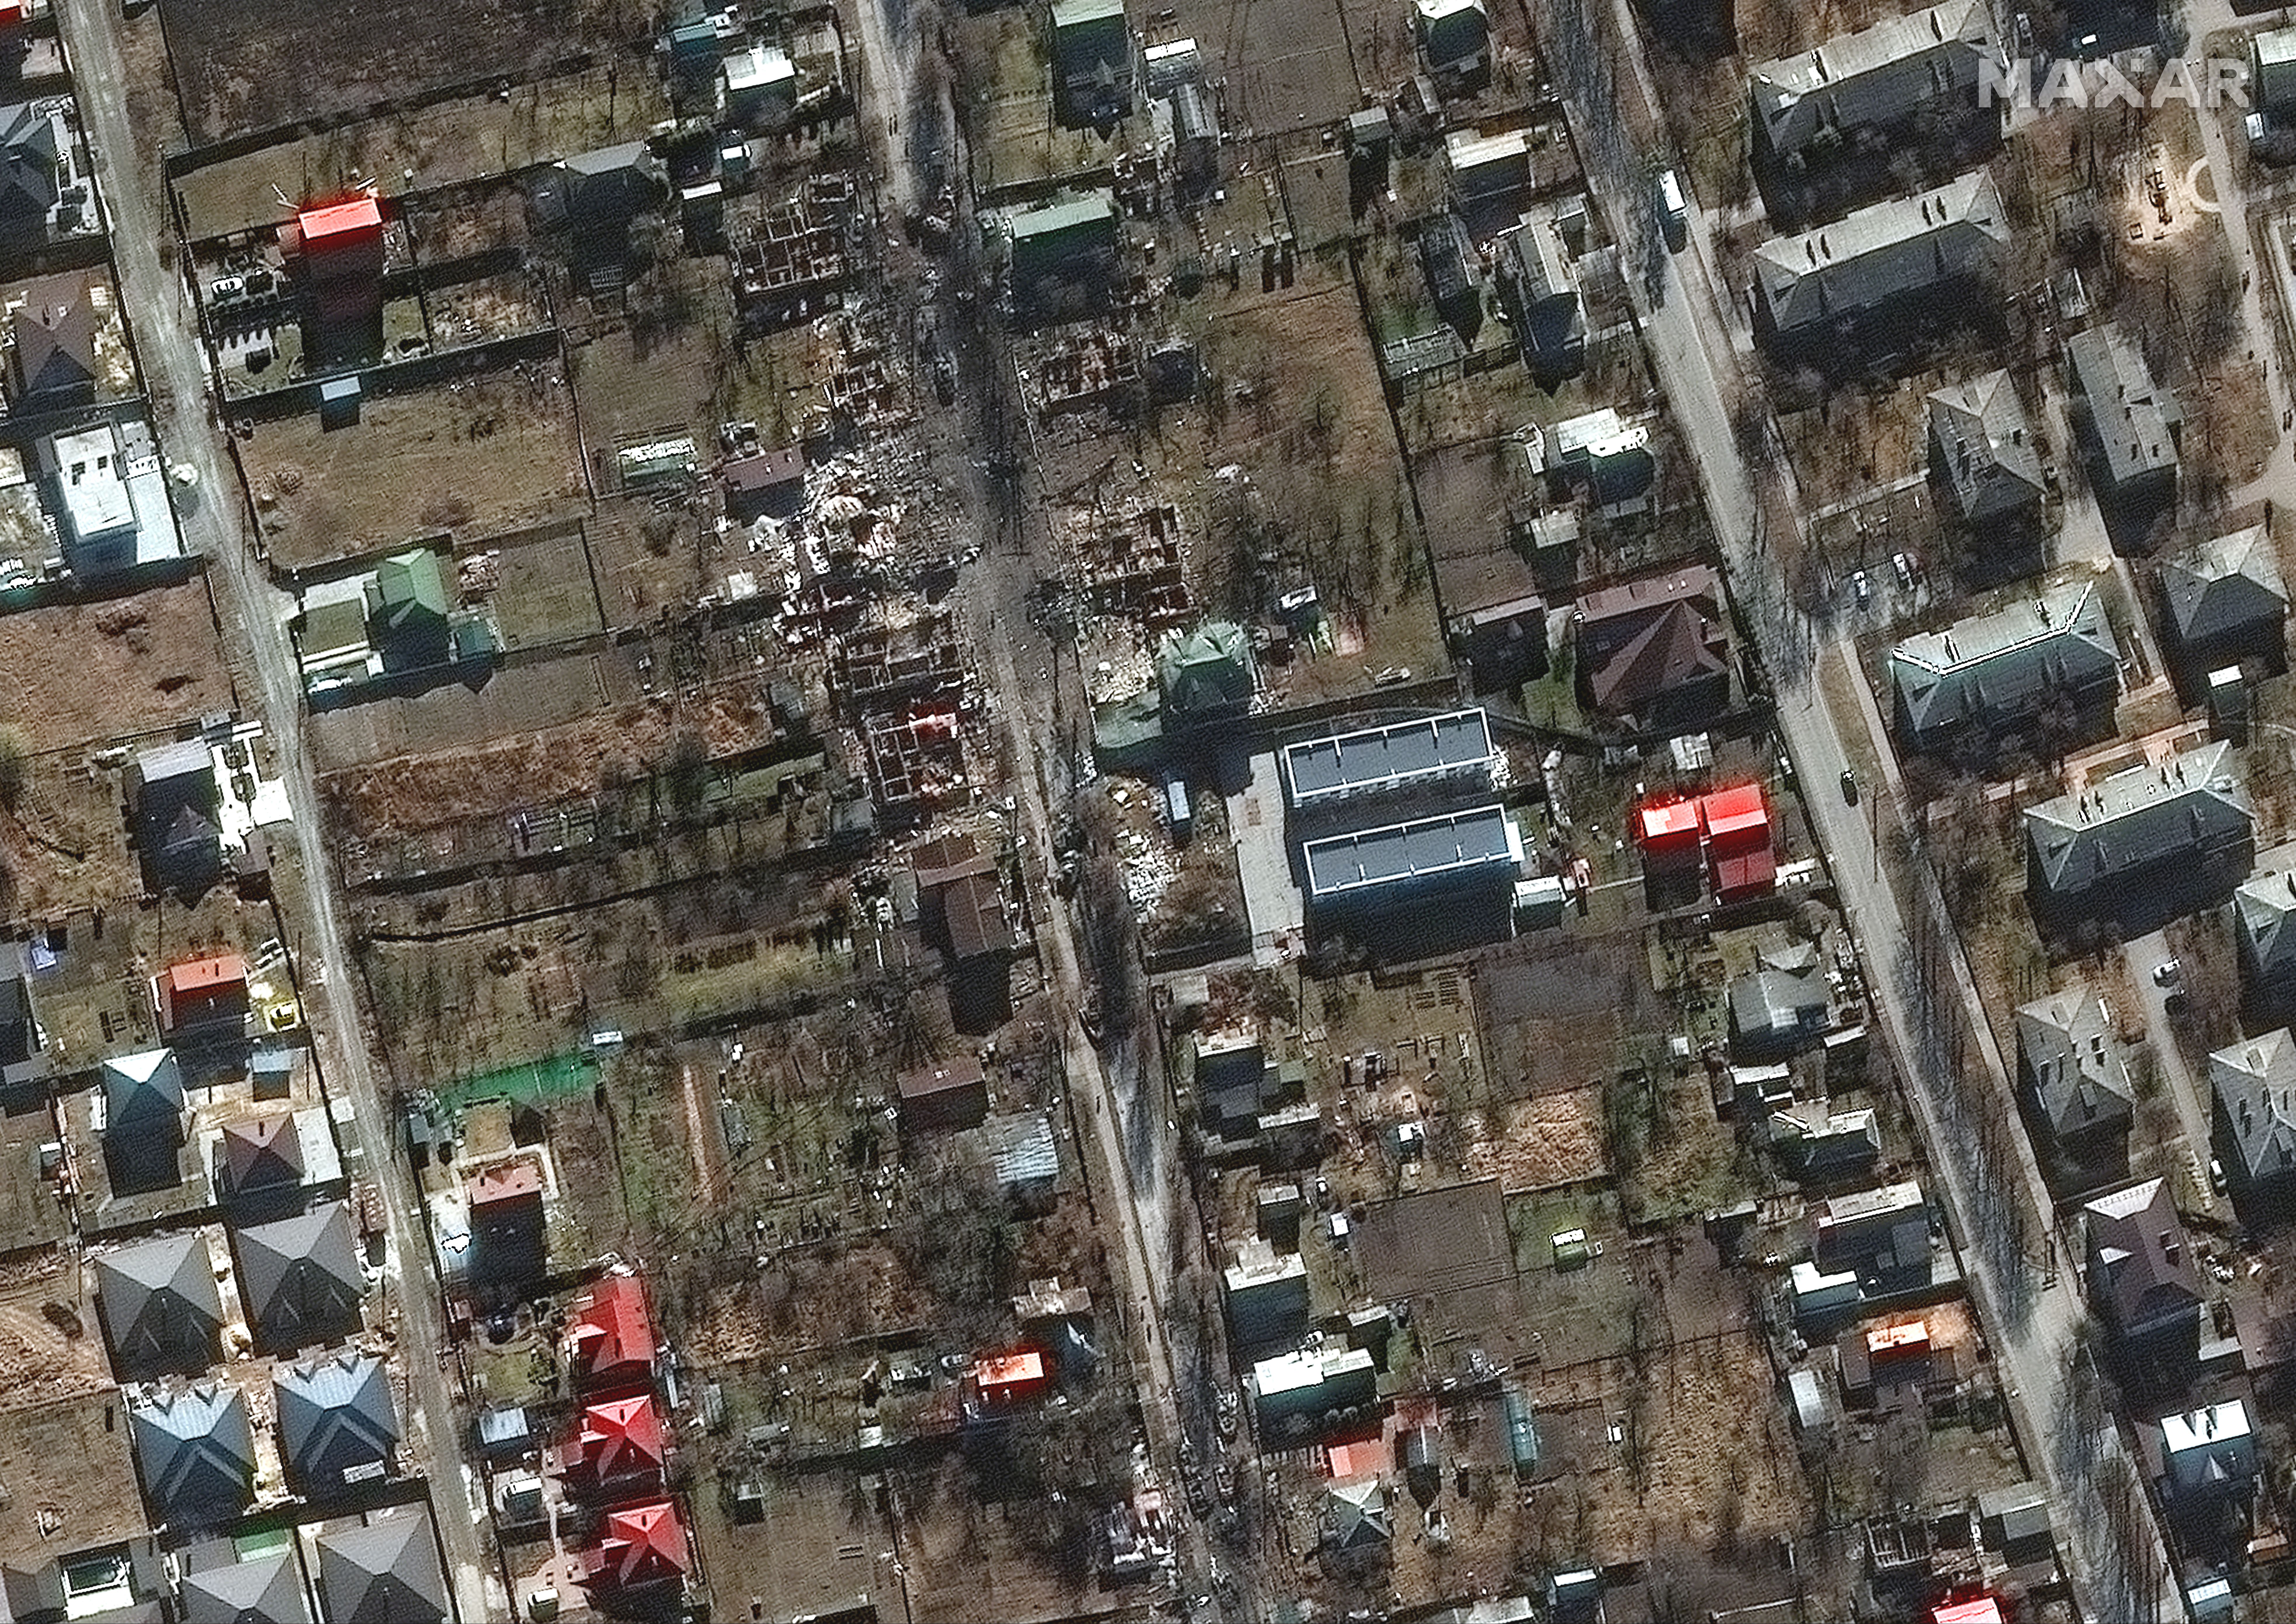 Close up images of a destroyed military vehicles and houses in a residential area south of Antonov Airport.